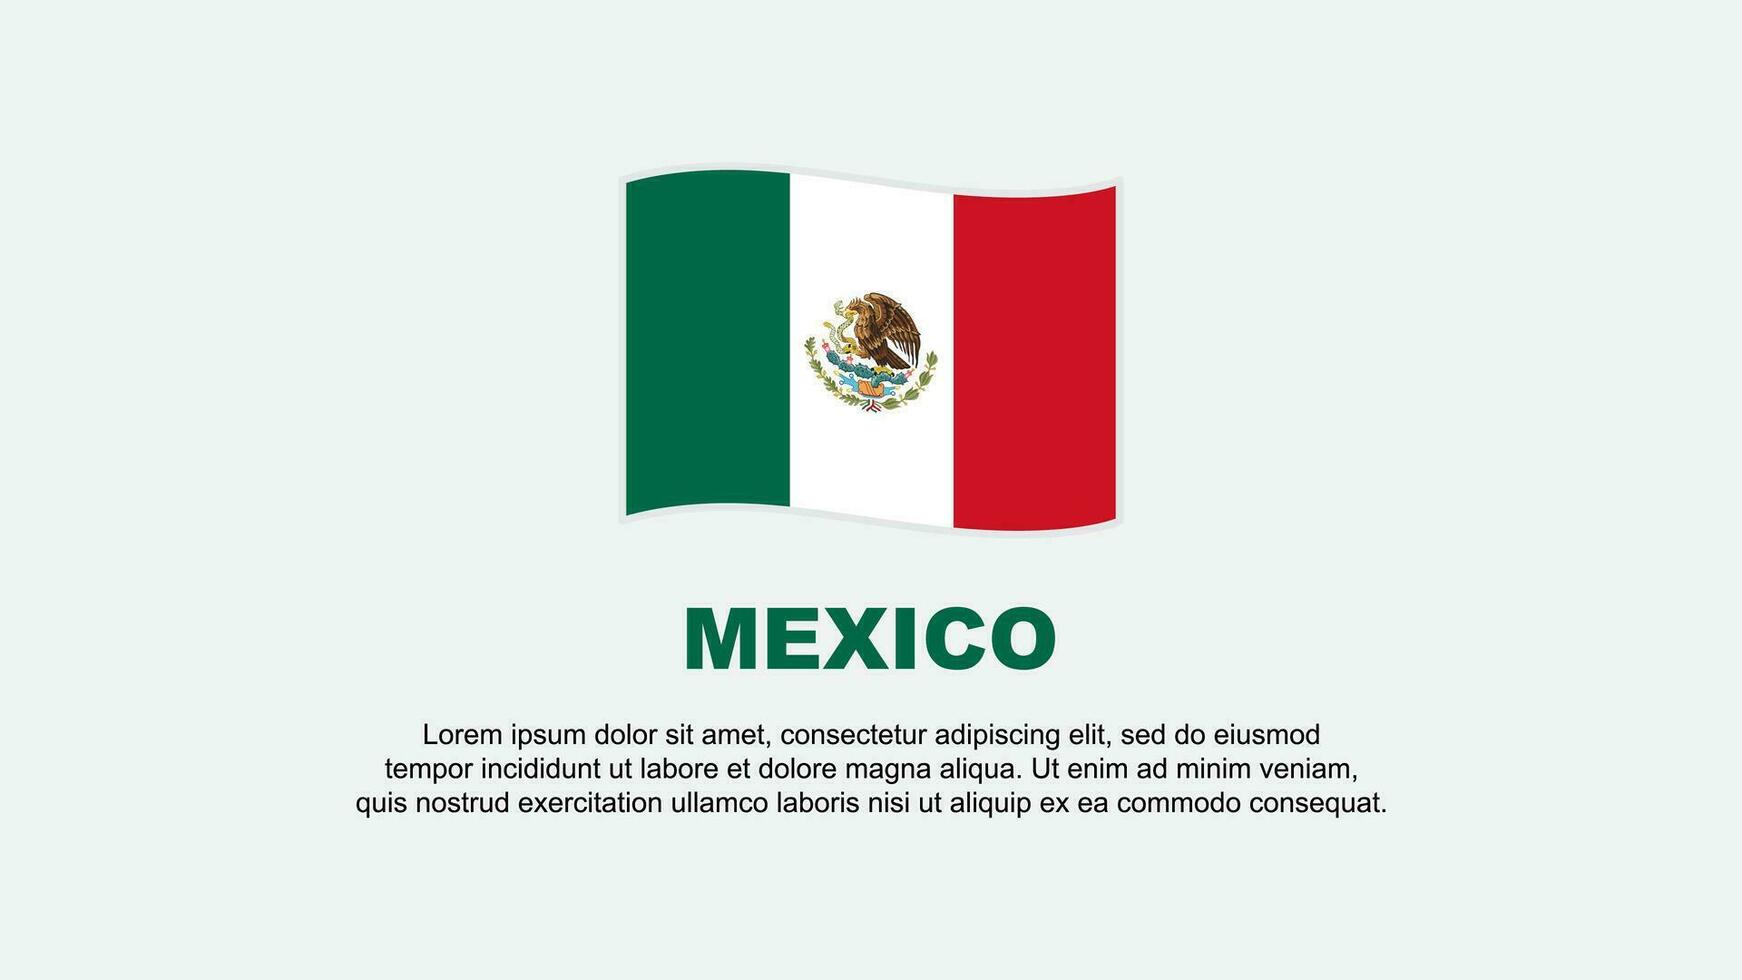 Mexico Flag Abstract Background Design Template. Mexico Independence Day Banner Social Media Vector Illustration. Mexico Background